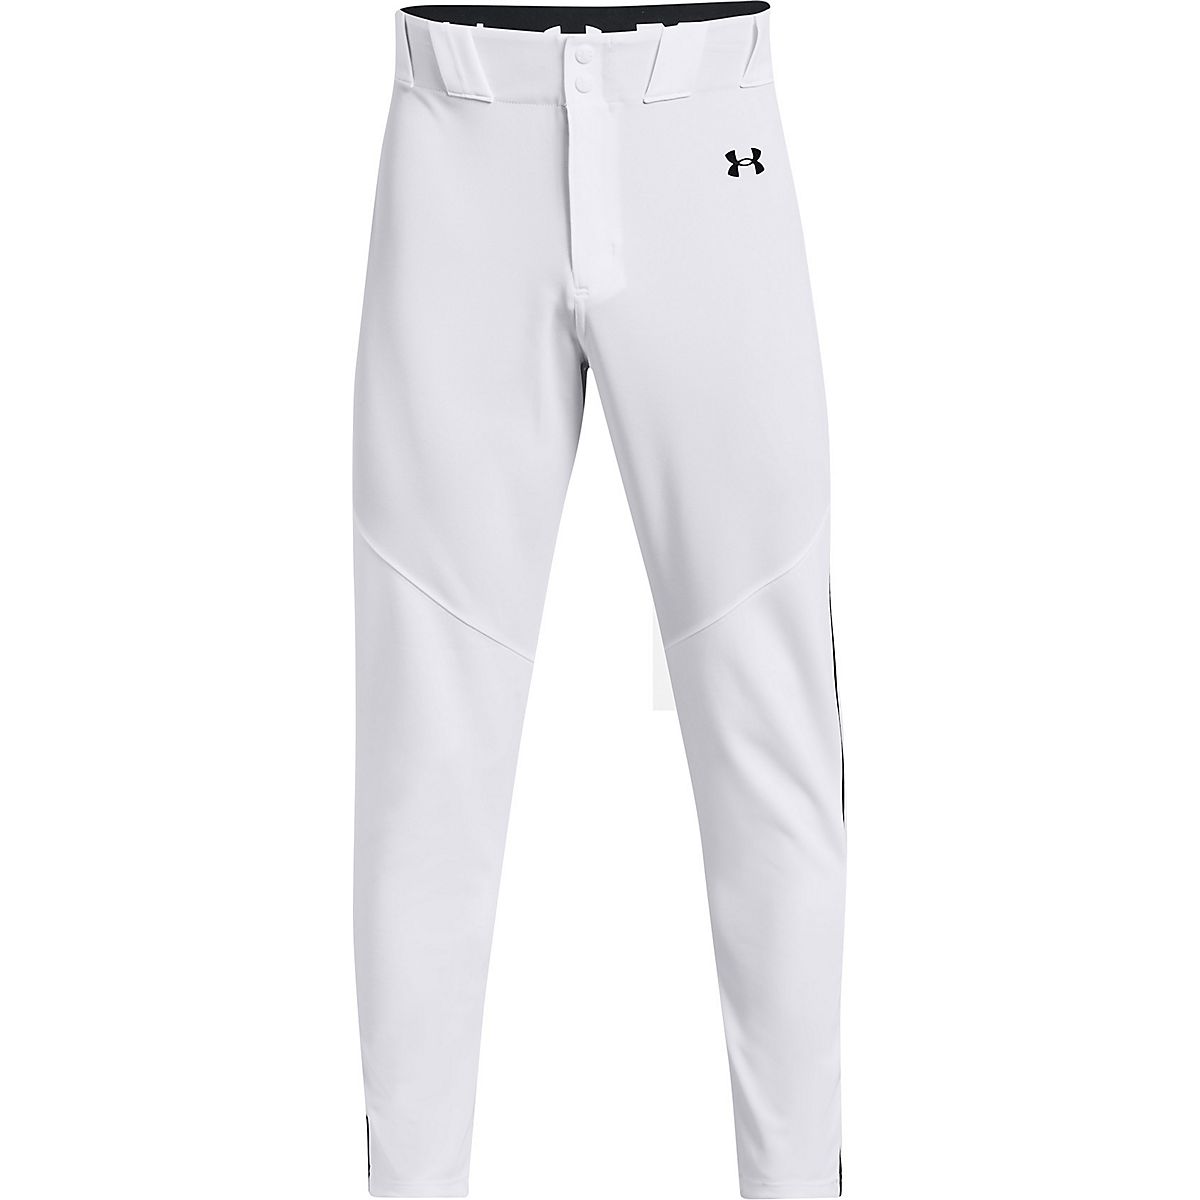 Under Armour Men’s Piped Baseball Pants | Academy